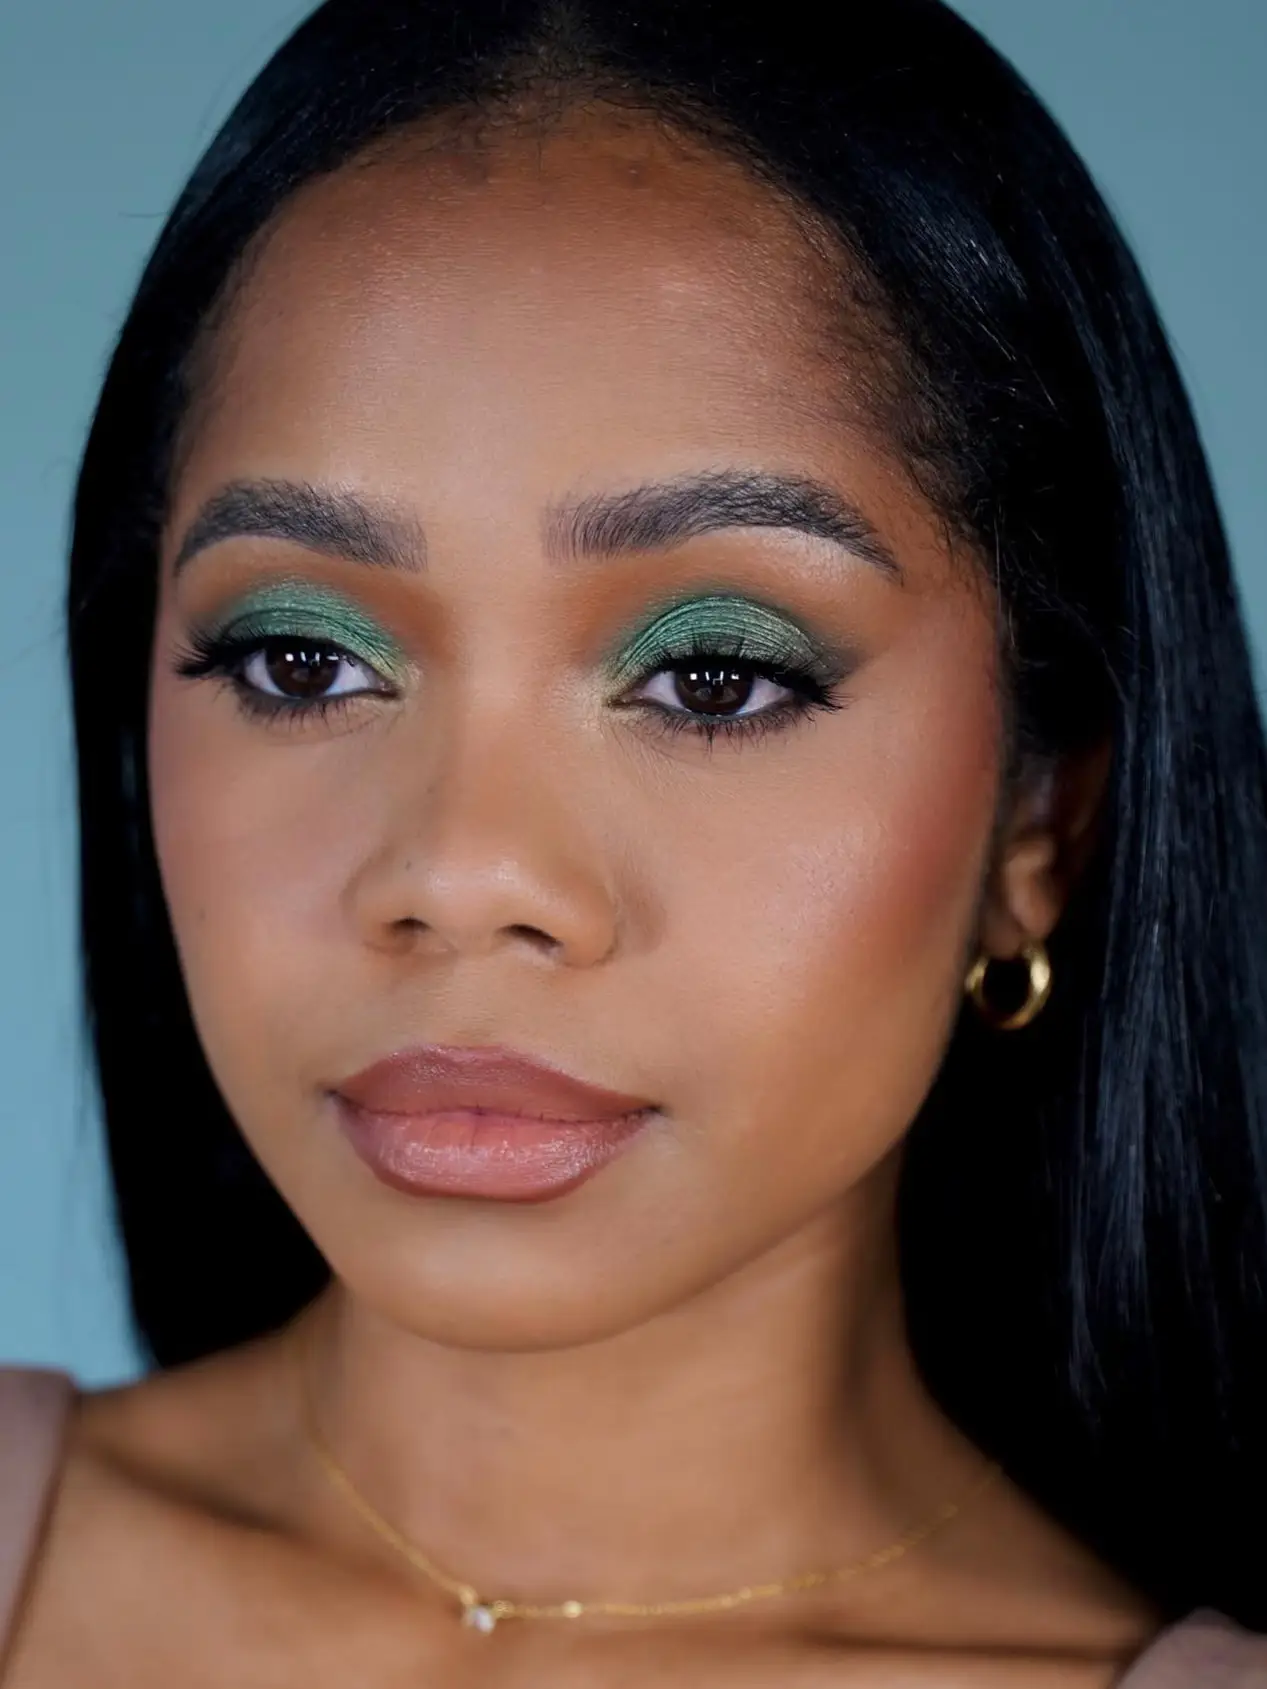 Matcha Latte Makeup Is the Latest Trend to Hit Our Feeds